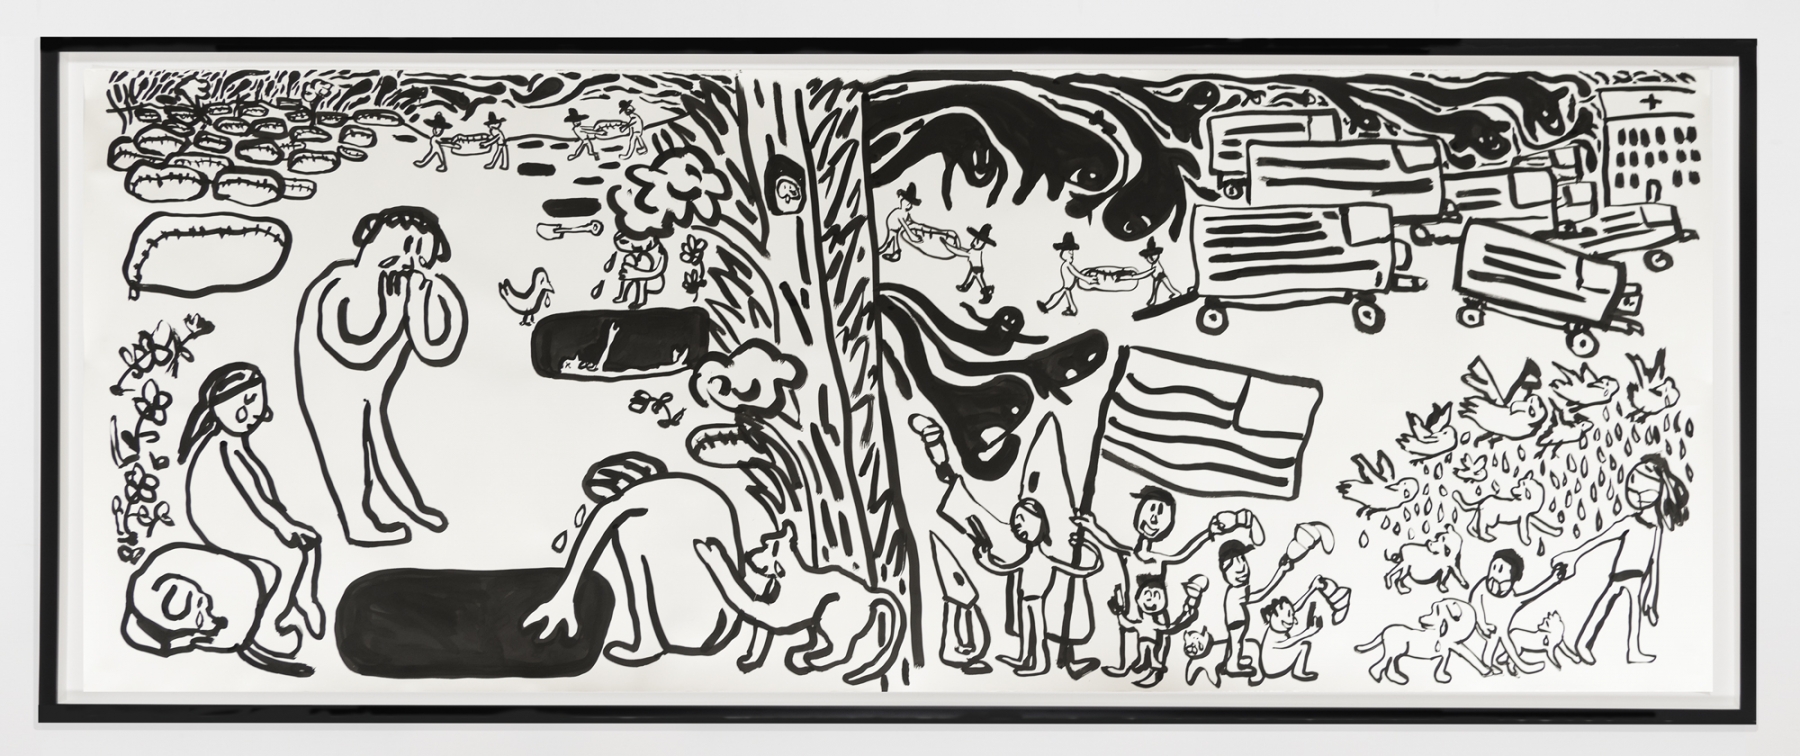 Paul Chan
Primitiv, 2020
Ink on paper
Paper: 50 1/2 x 132 inches (128.3 x 335.3 cm)
Frame: 54 5/8 x 136 1/8 x 2 7/8 inches (138.7 x 345.8 x 7.3 cm)